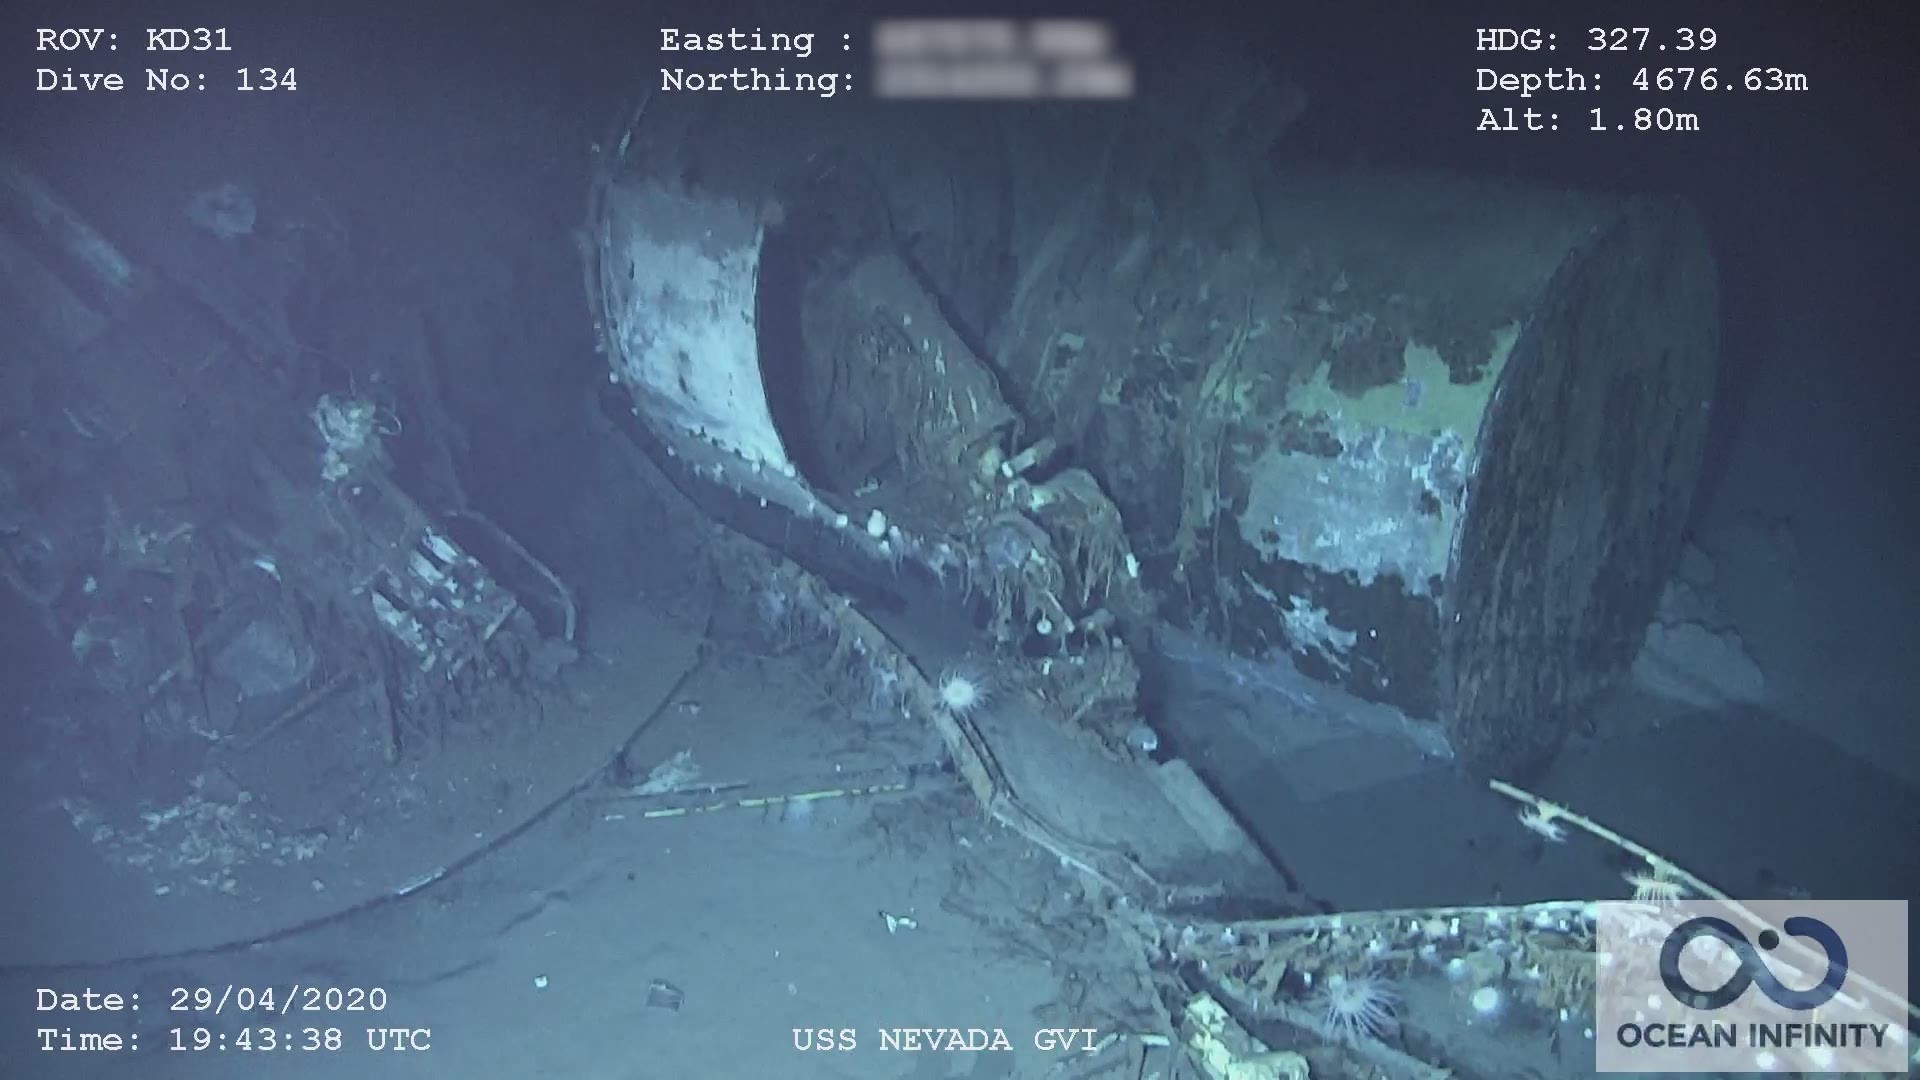 The iconic battleship that saw action in both World Wars and was used for atomic bomb testing, now found in Pacific with state-of-the-art subsea technology.